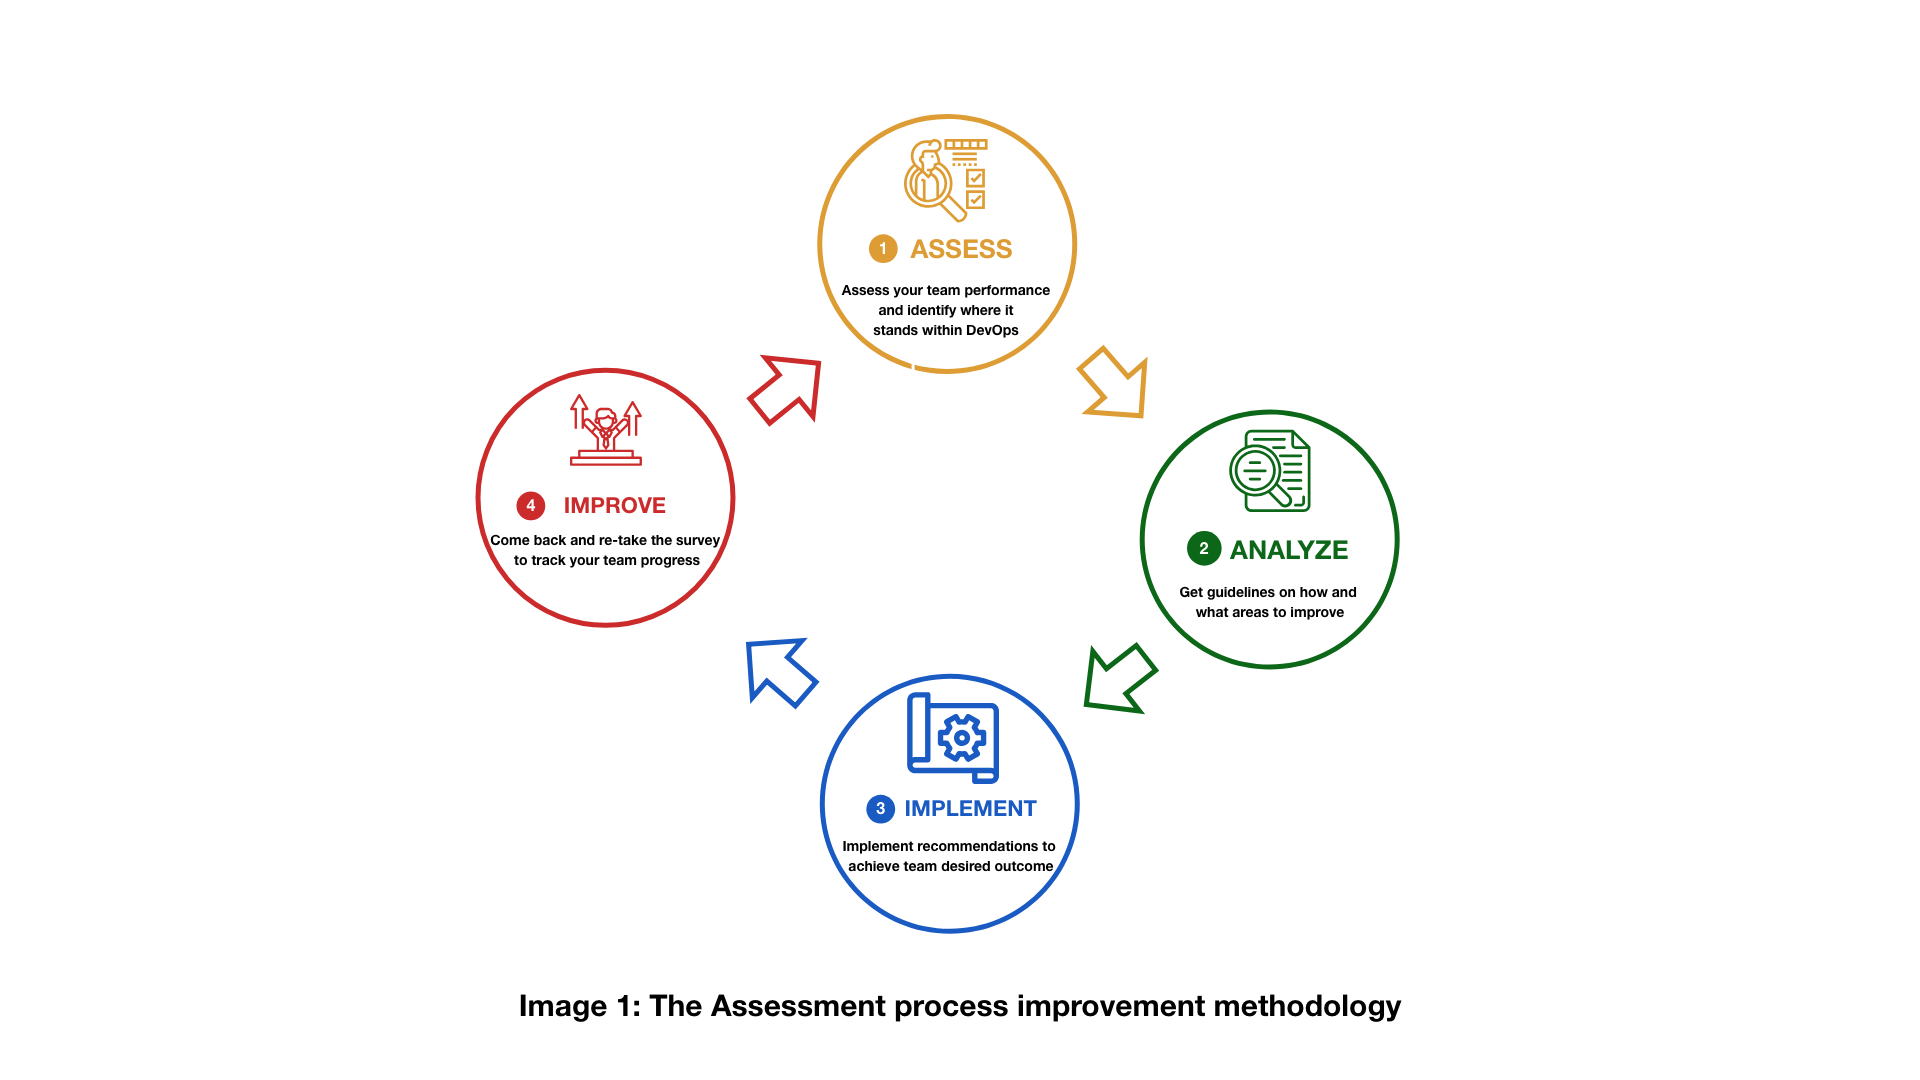 A graphic with 4 circles demonstrating assessment cycle process.
There are 4 circles connected with an arrow  in clockwise direction.
The circle titles are: top "Assess"; right "Analyze"; bottom "Implement"; left "Improve".